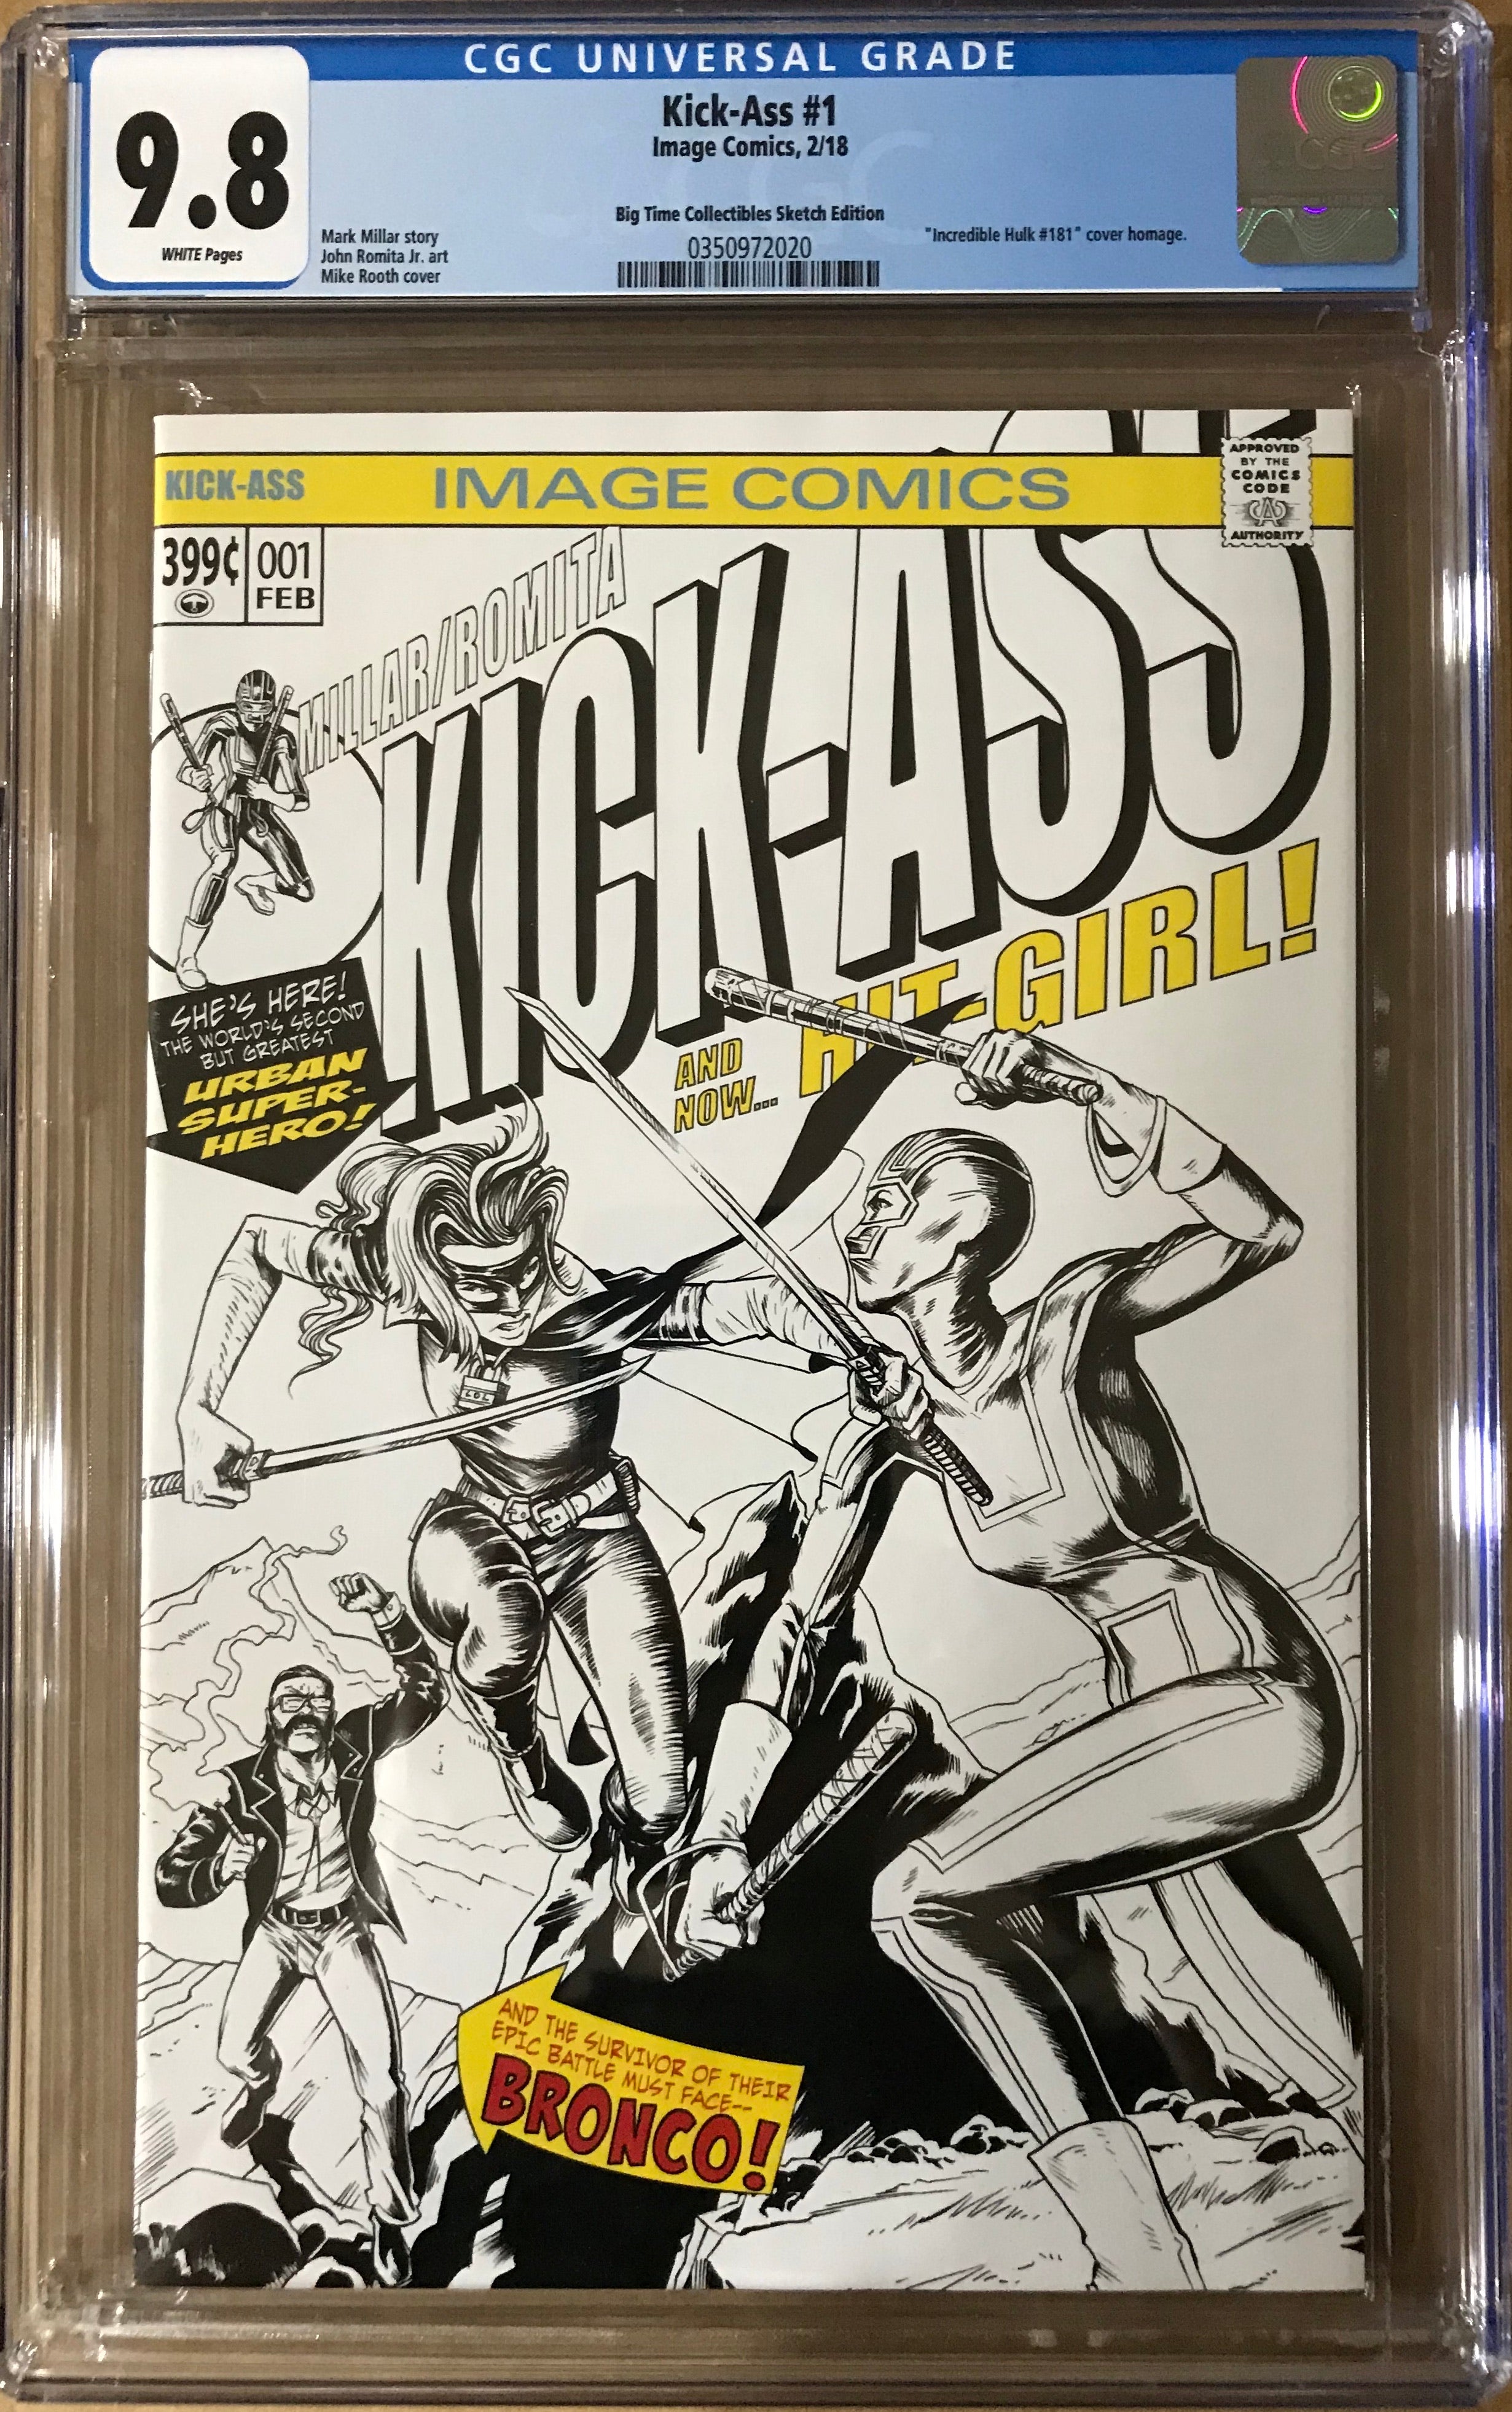 KICK-ASS #1 MIKE ROOTH B/W EXCLUSIVE COVERS CGC 9.8 BLUE LABEL HULK#181 HOMAGE (IN STOCK)